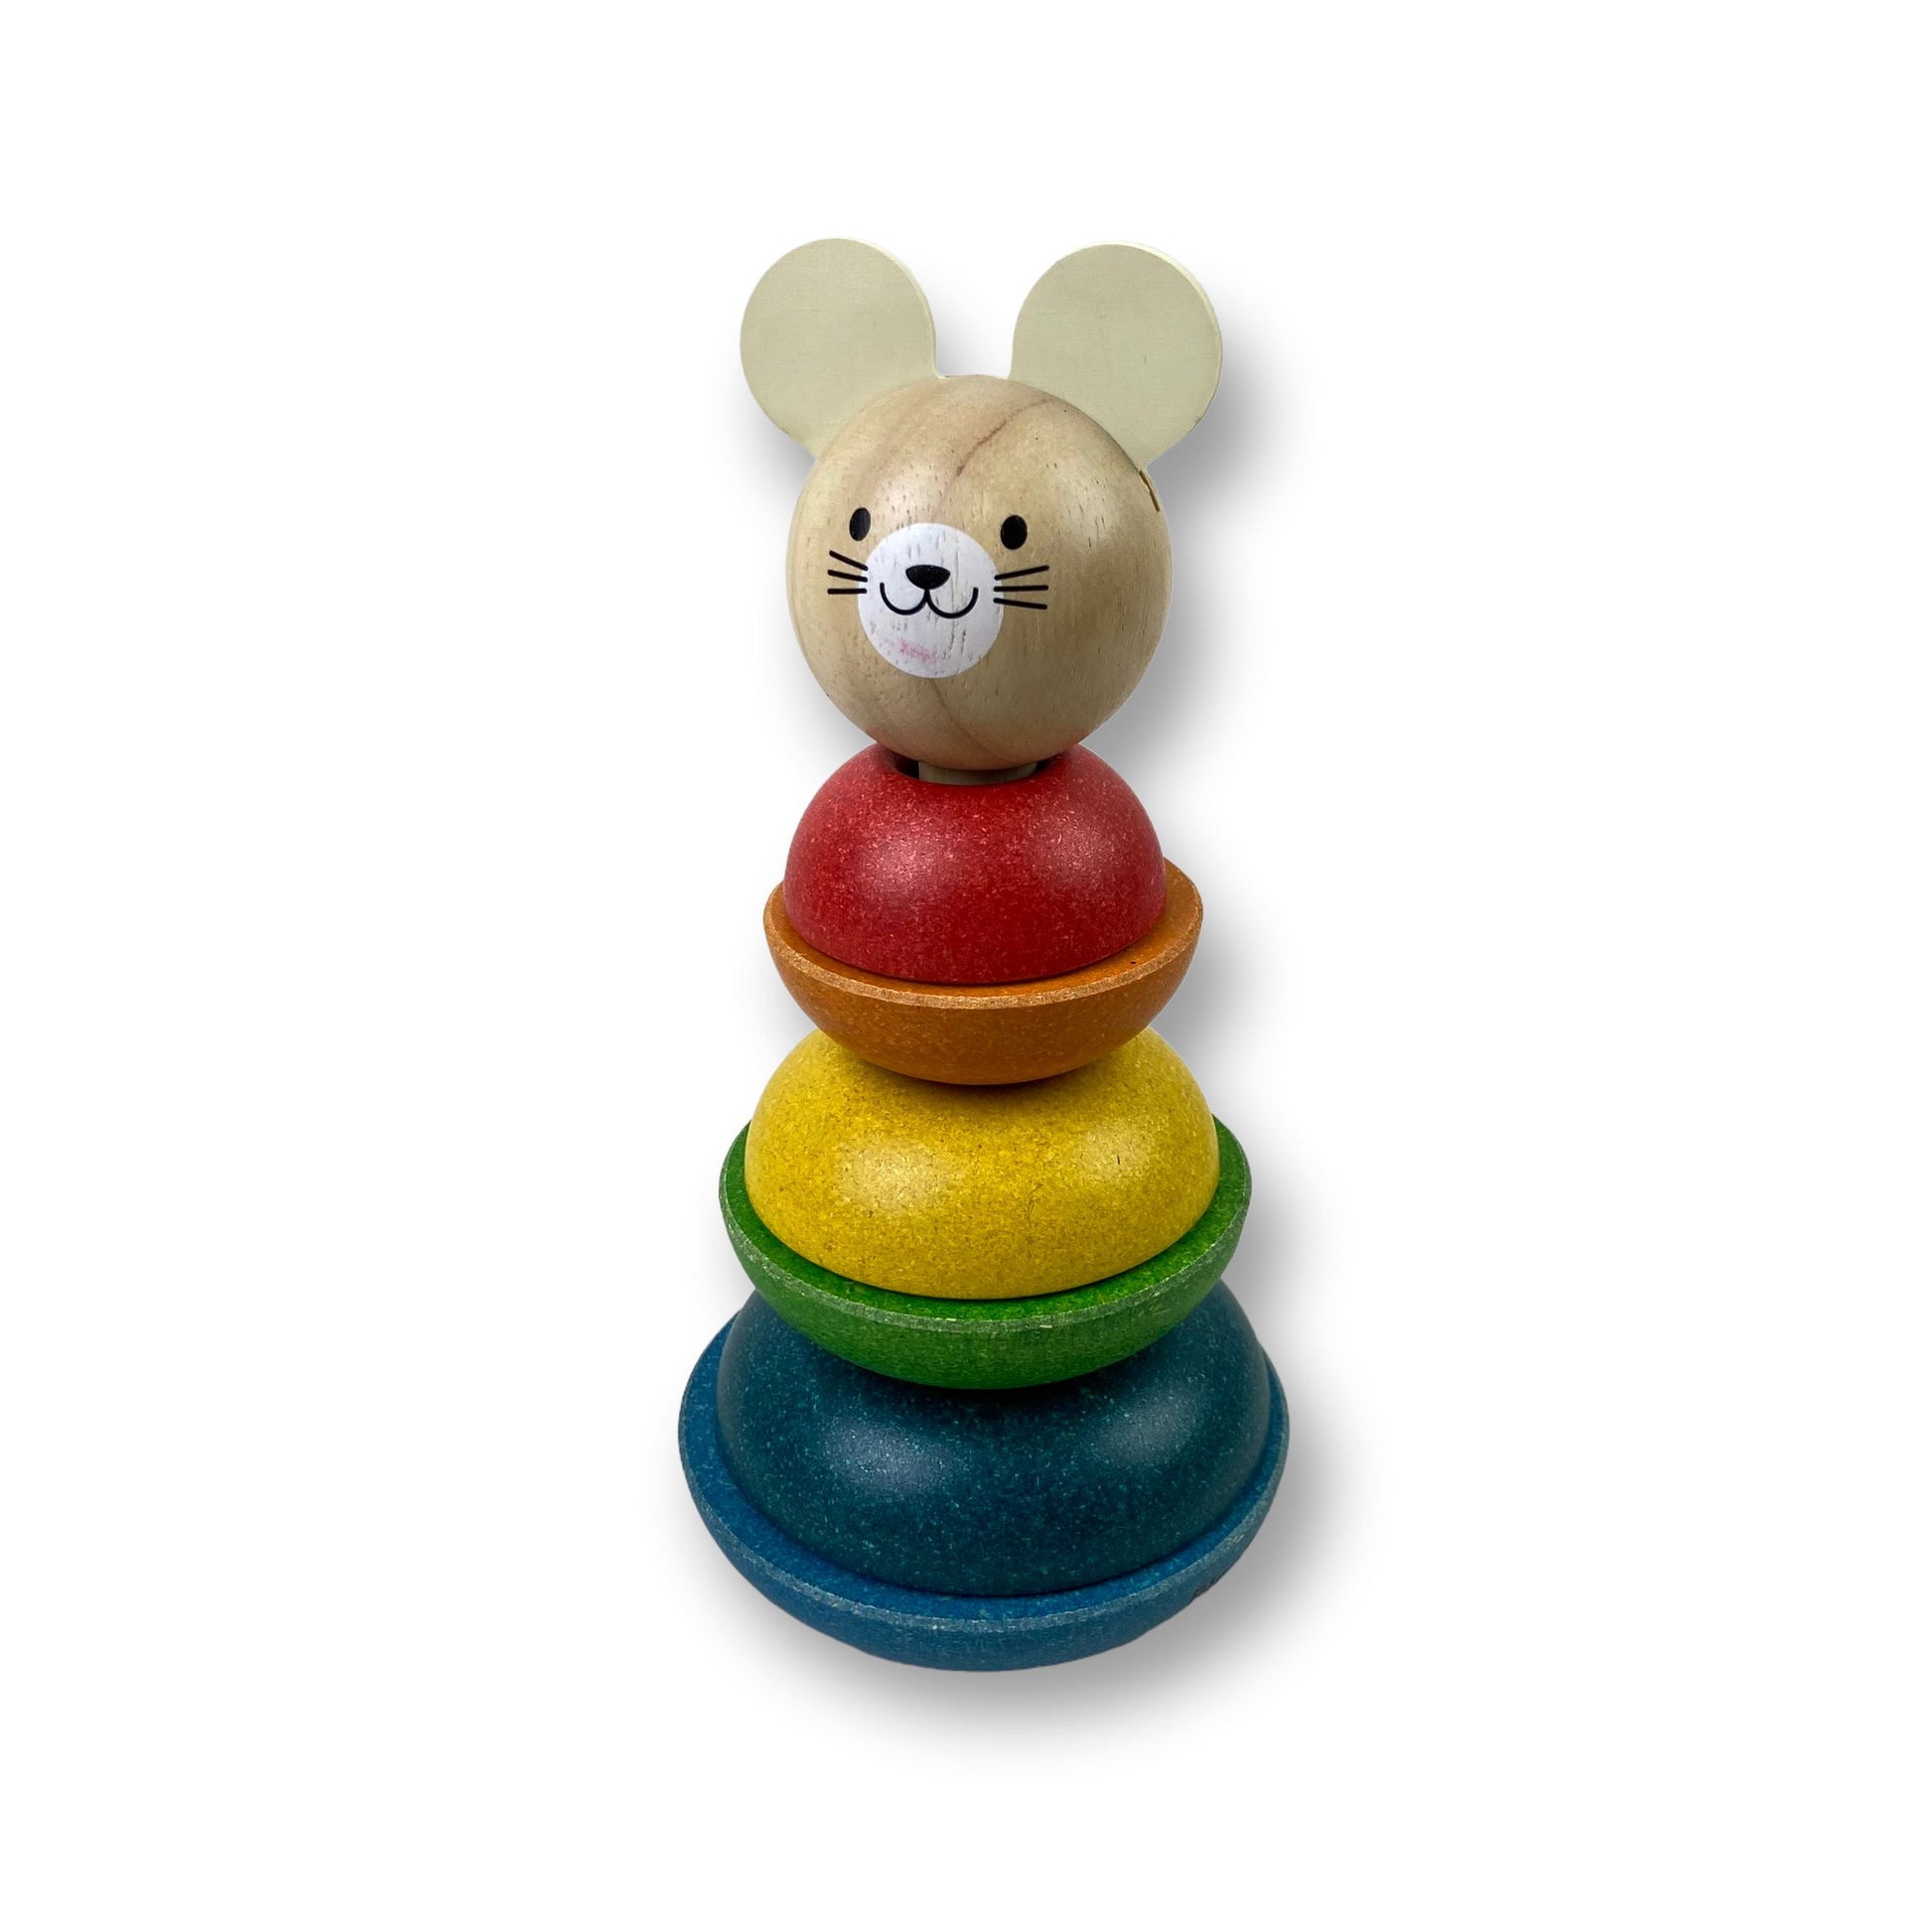 PlanToys Stacking Ring - Mouse Toys 